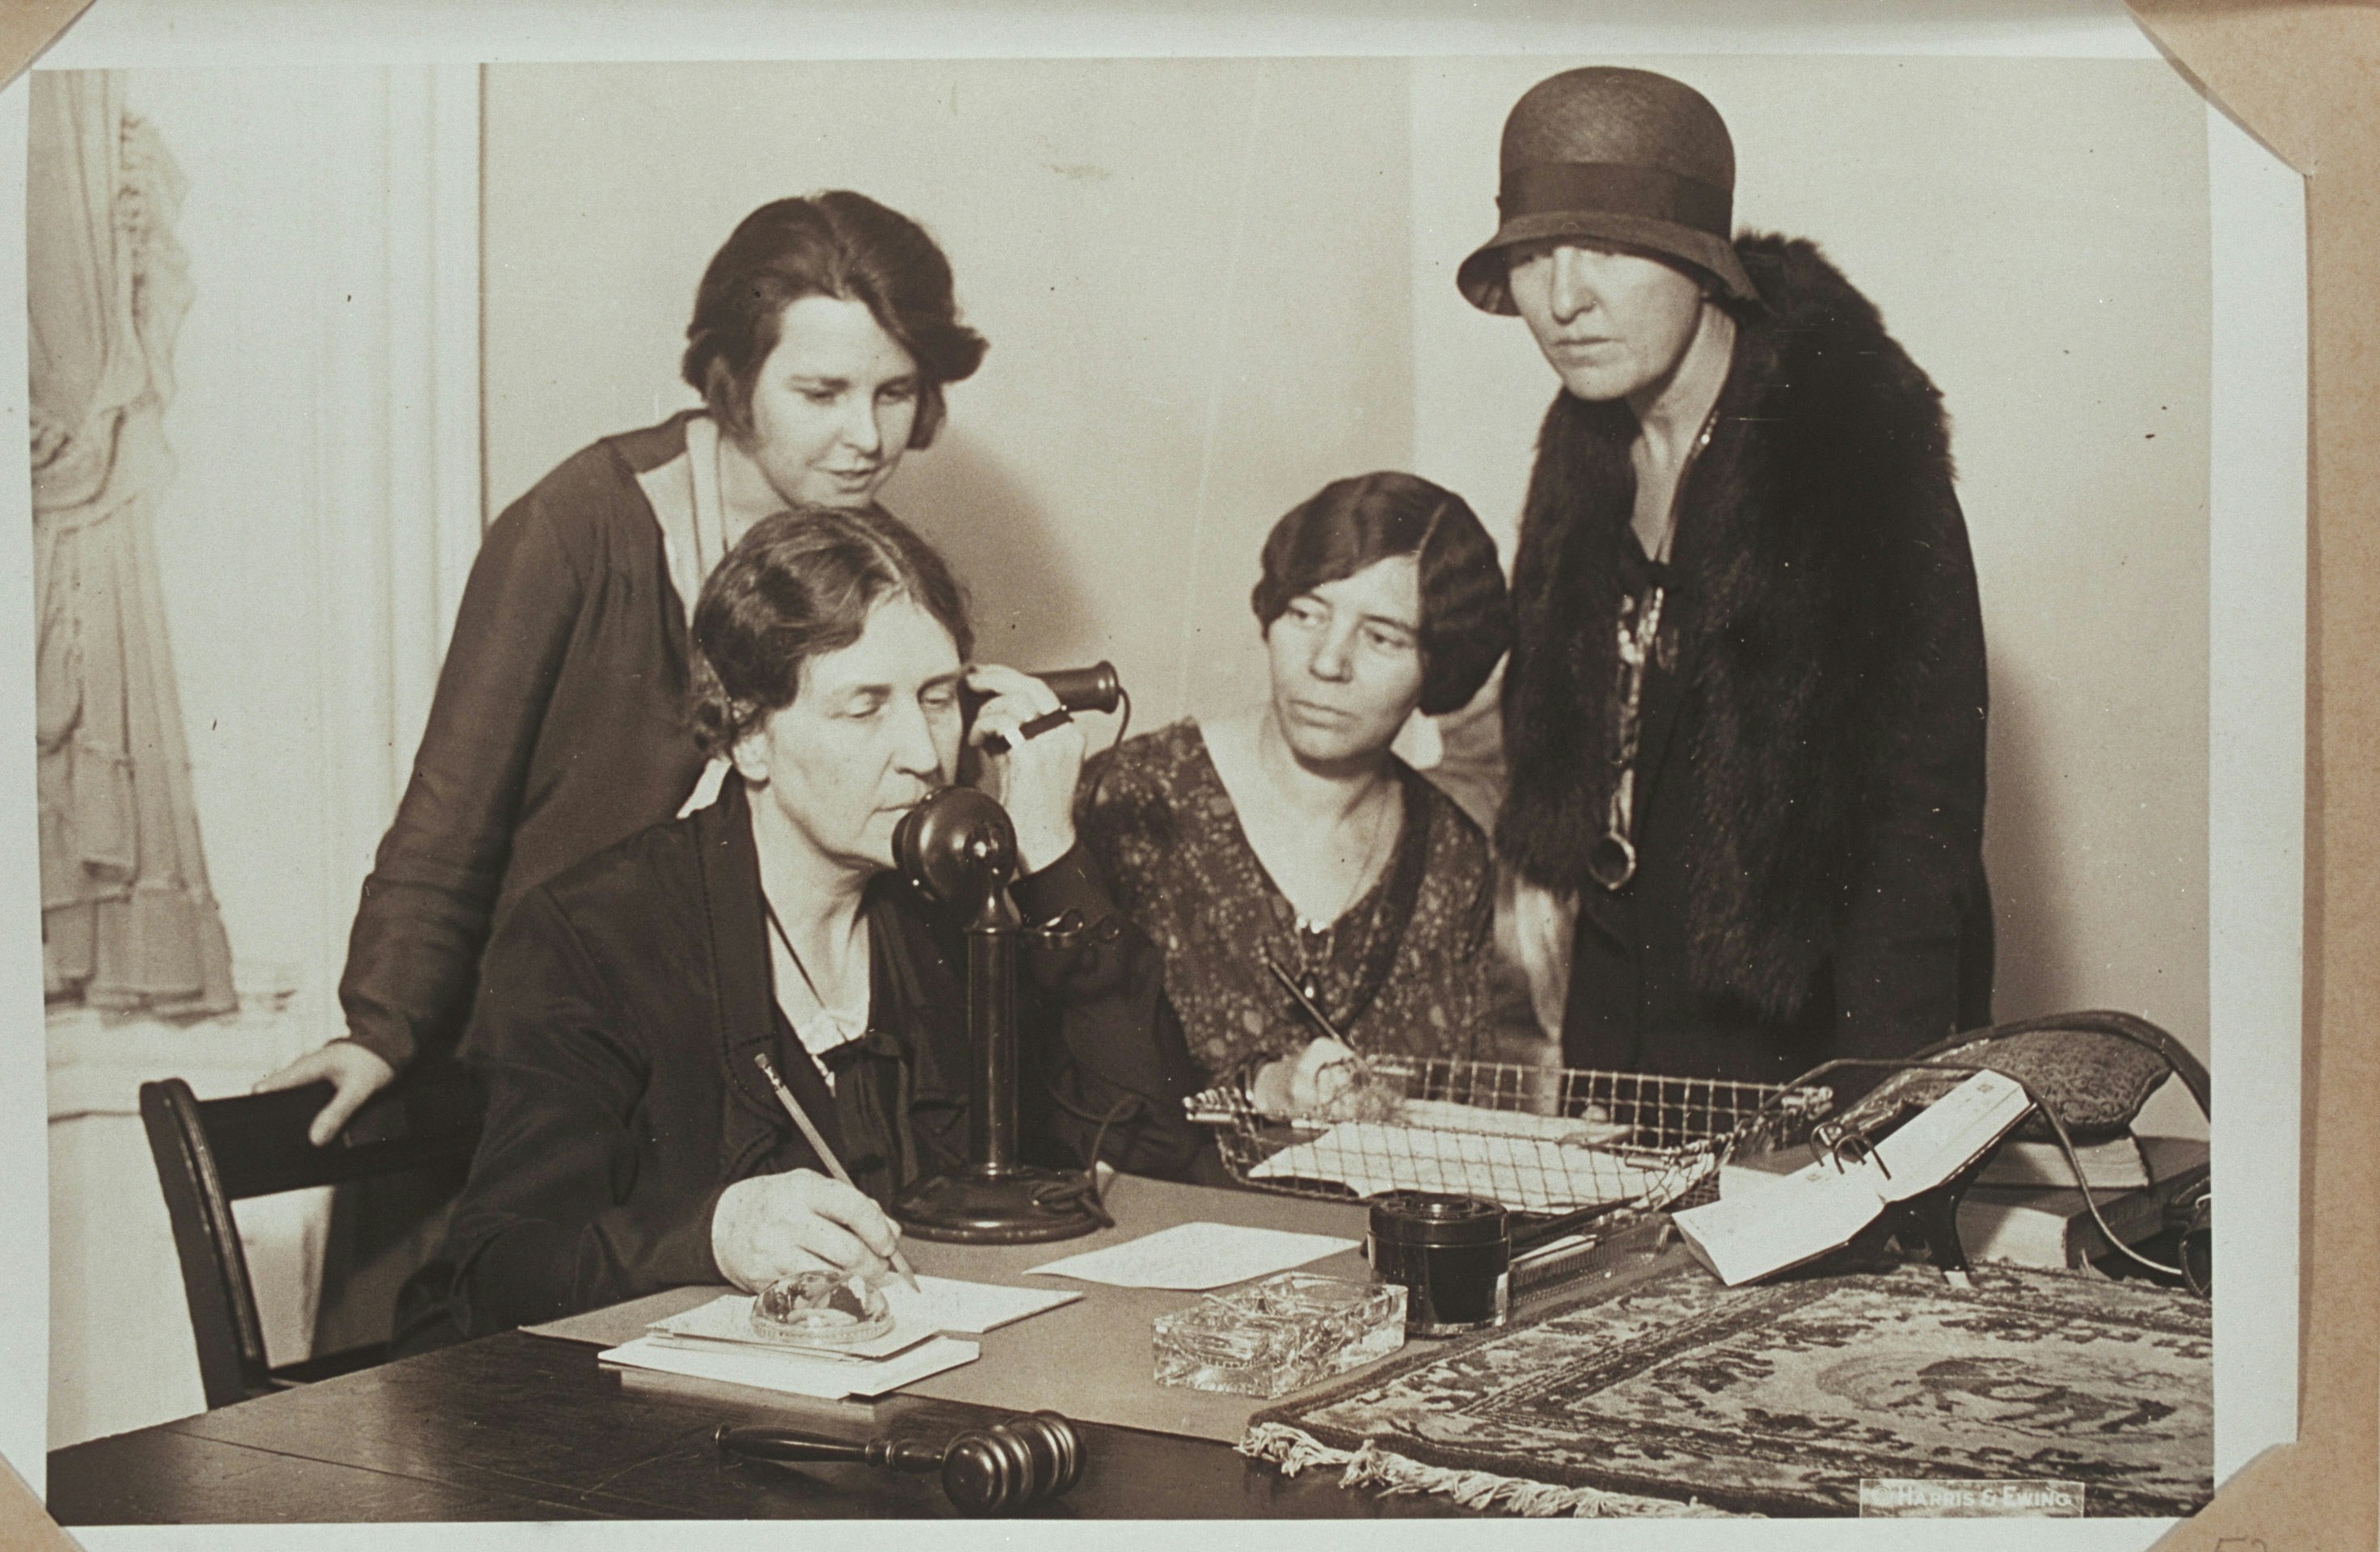 Anna Wiley telephoning Doris Stevens accompanied by other women